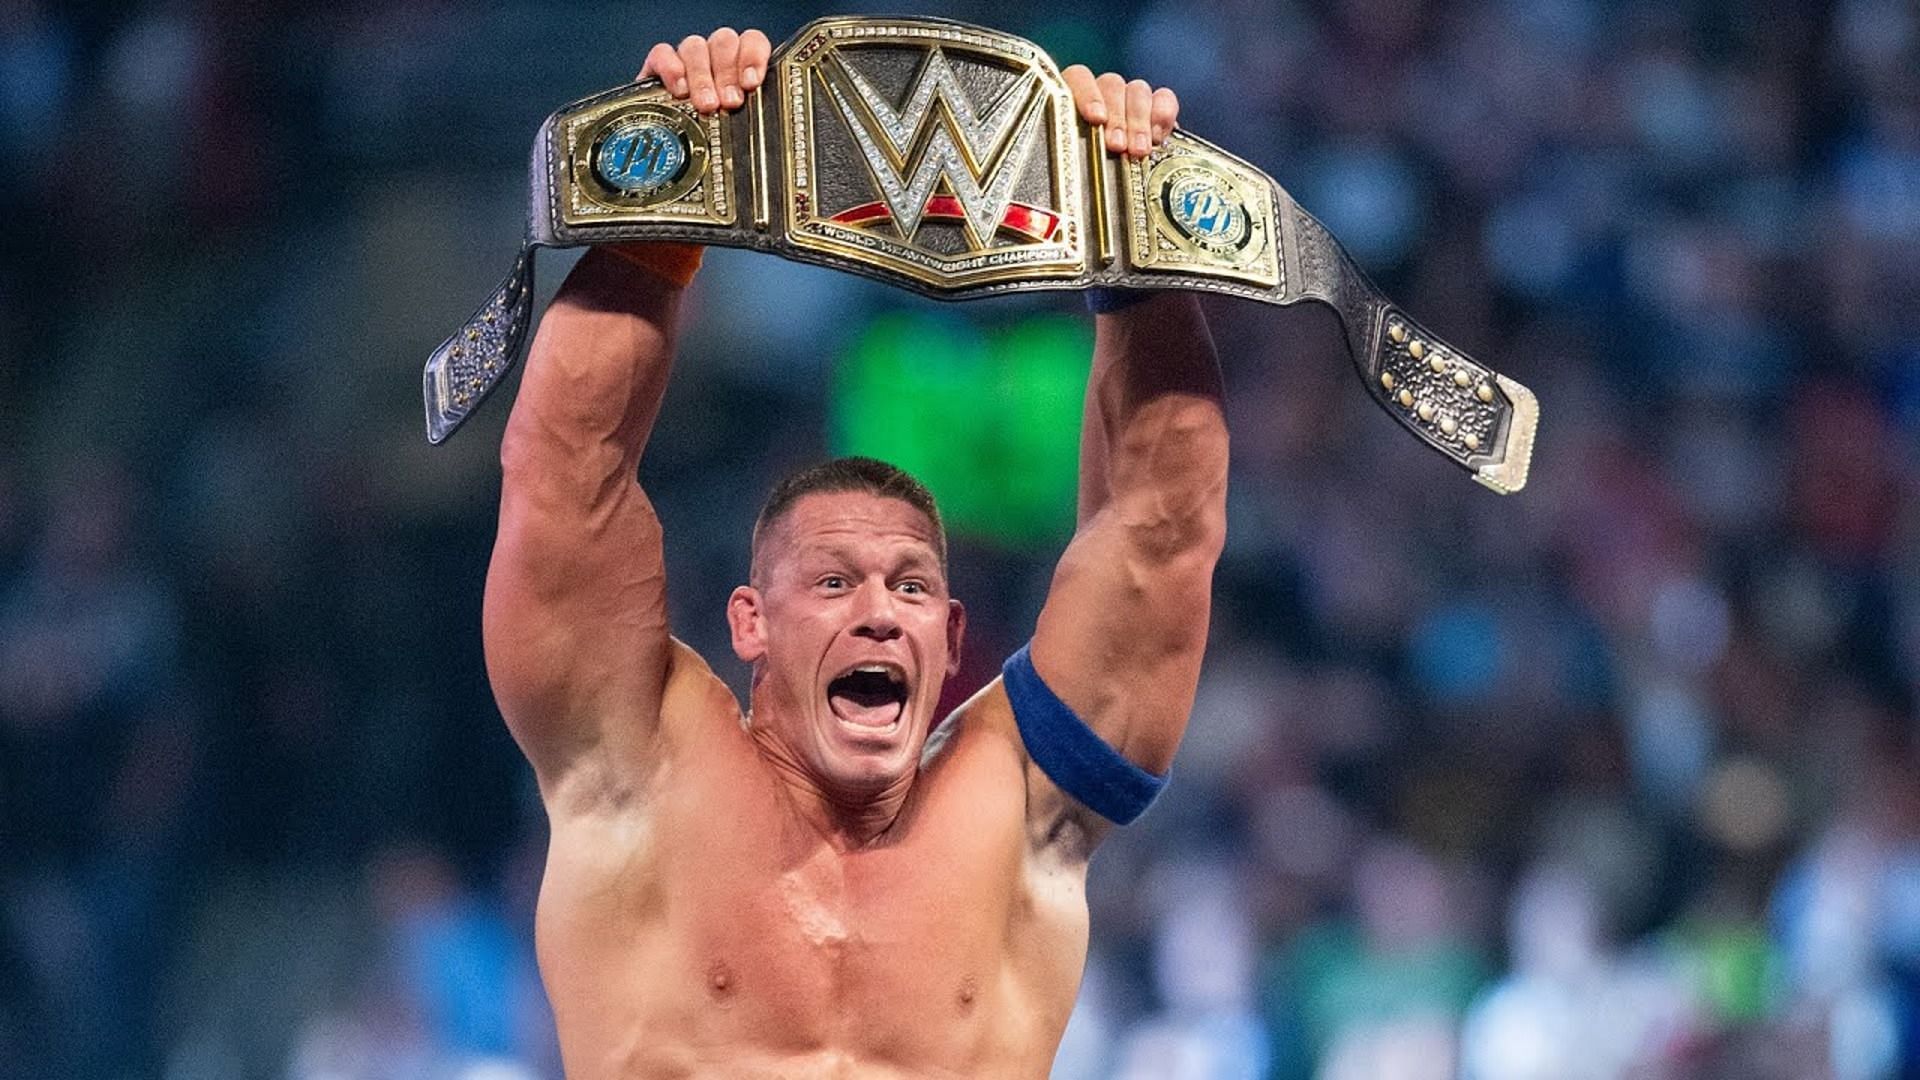 John Cena has won countless titles over the course of his WWE career.